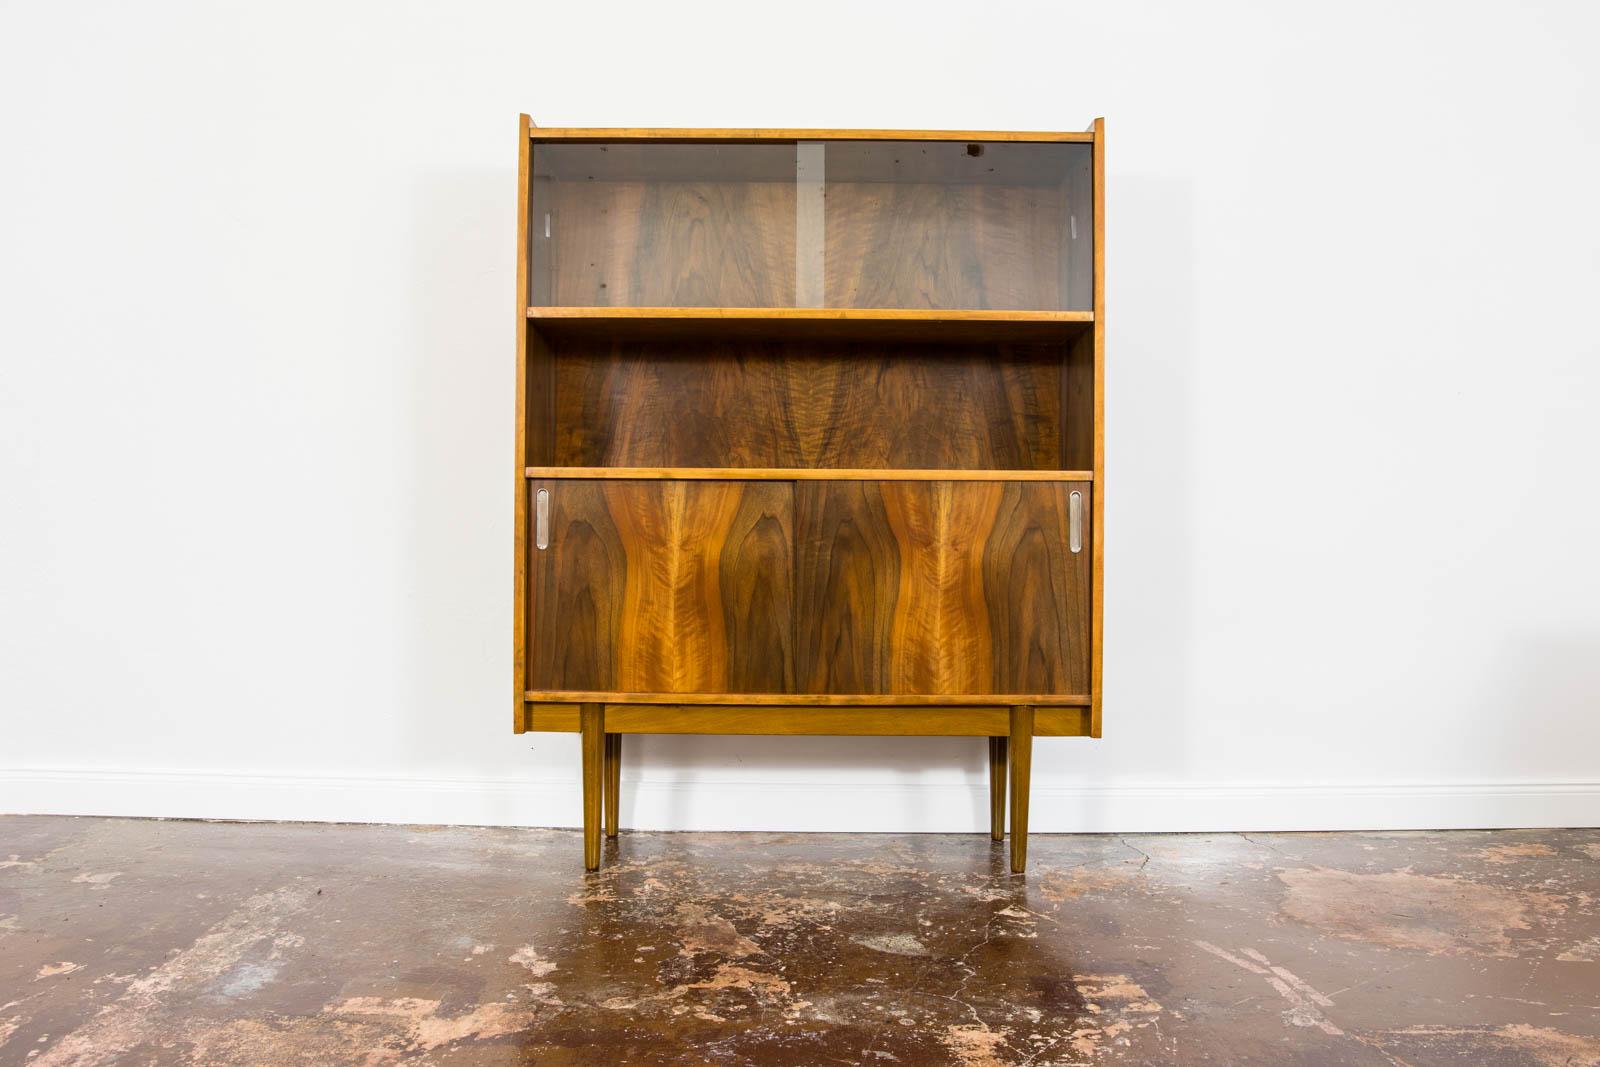 Mid Century Modern Walnut Display Cabinet 1960's by Bytomskie Furniture Factories in 1960's.
Item has been restored and refinished enhancing unique grain hue and pattern of walnut veneer.